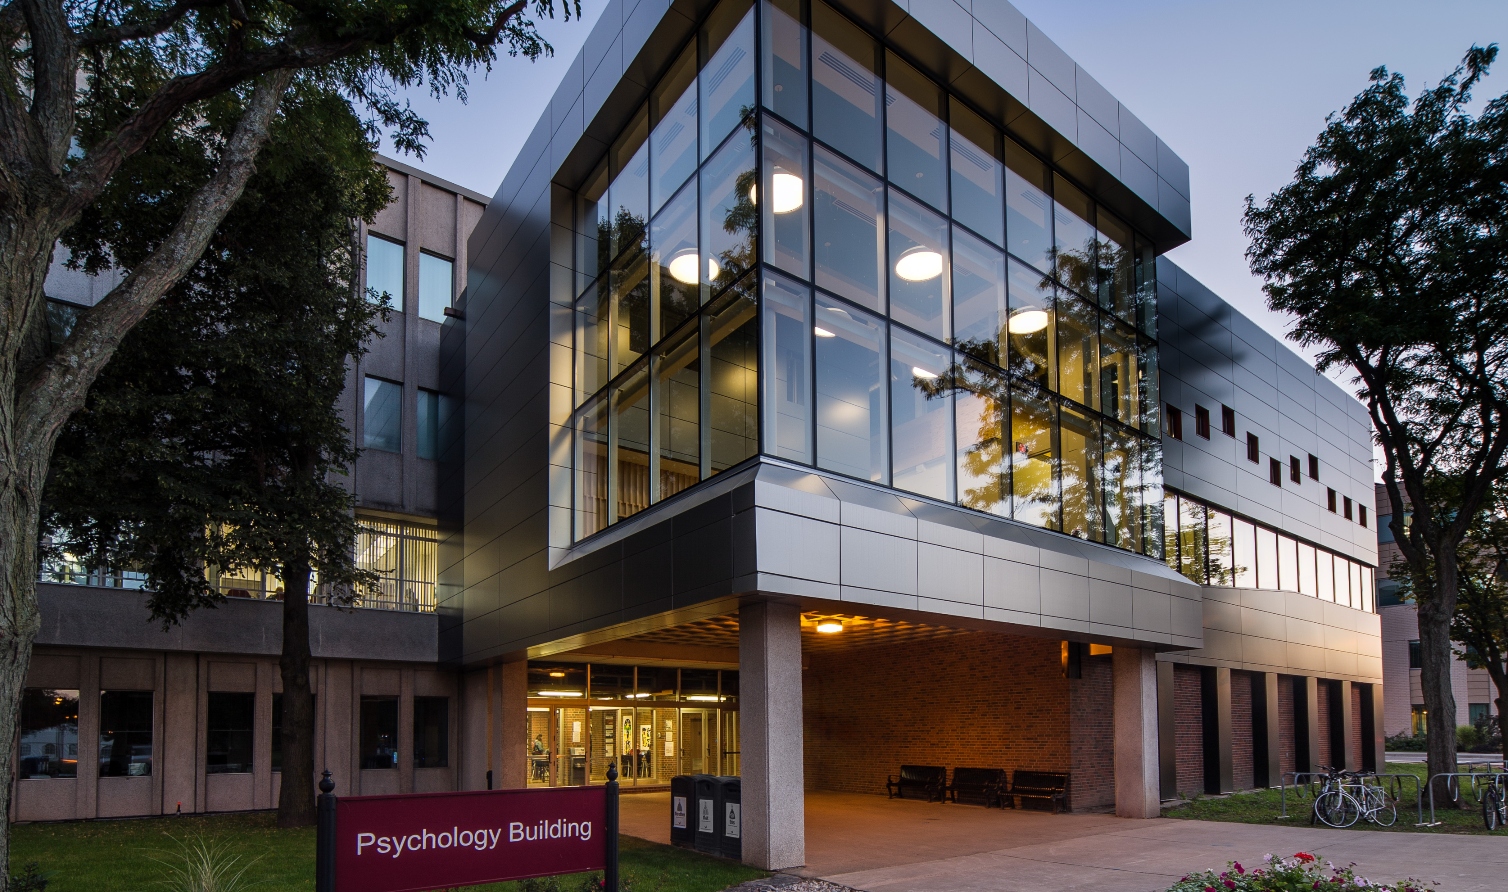 Exterior photo of Psychology Building at twilight.